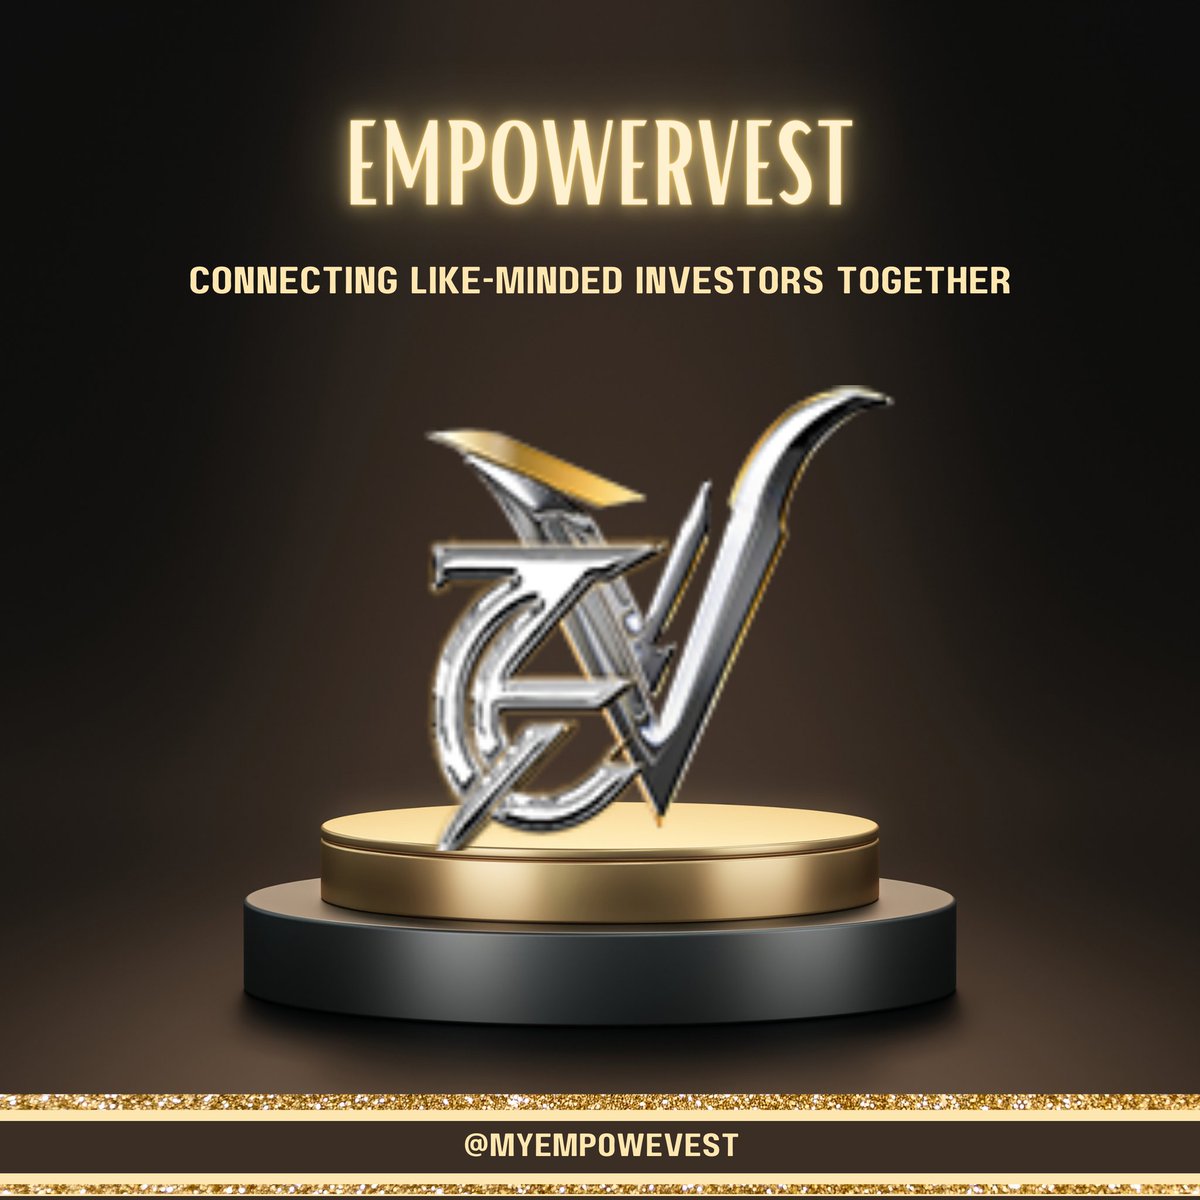 Empowervest is more than just investing—it's about connecting like-minded people. Join our community to grow your wealth and network with others who share your financial goals. Launching soon! 

#Empowervest #InvestingTogether #FinanceCommunity